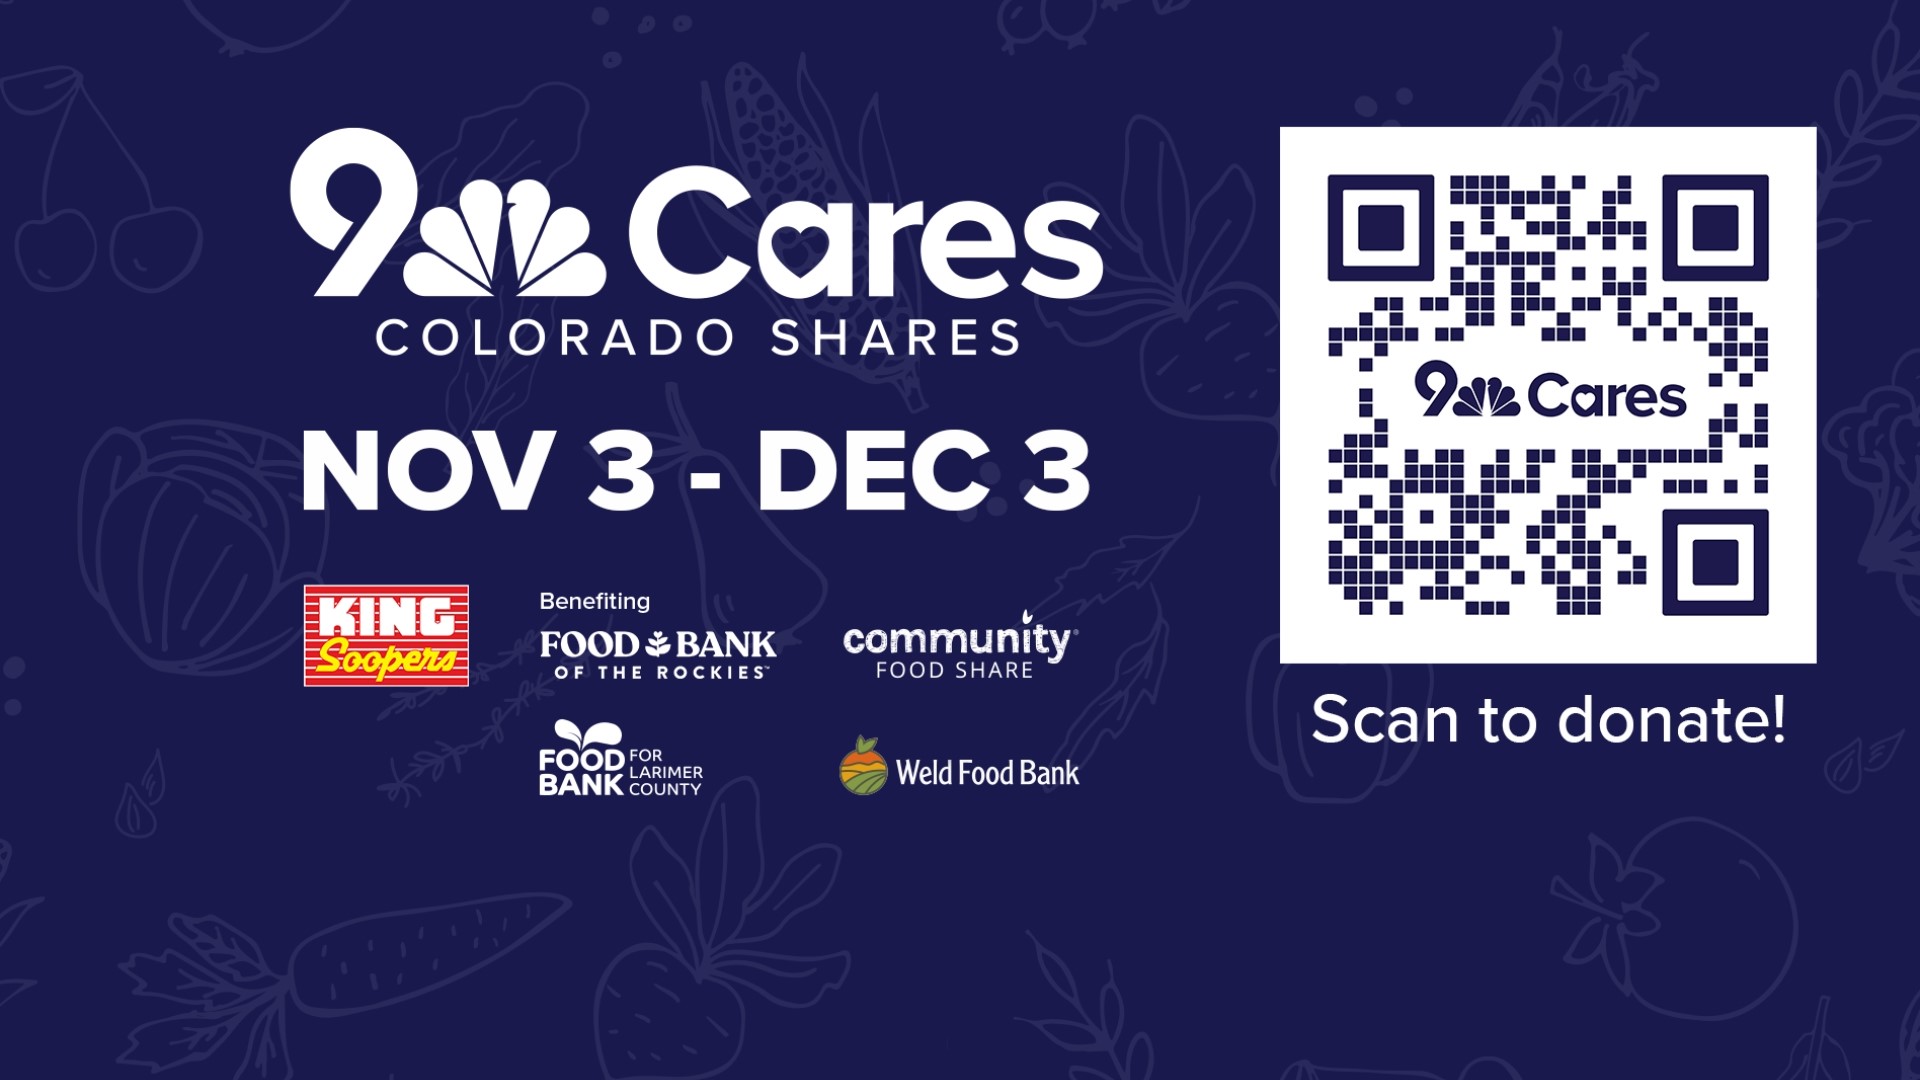 Help us fill the food banks and pantries in our community with a donation online or at King Soopers in our 9Cares Colorado Shares food drive.